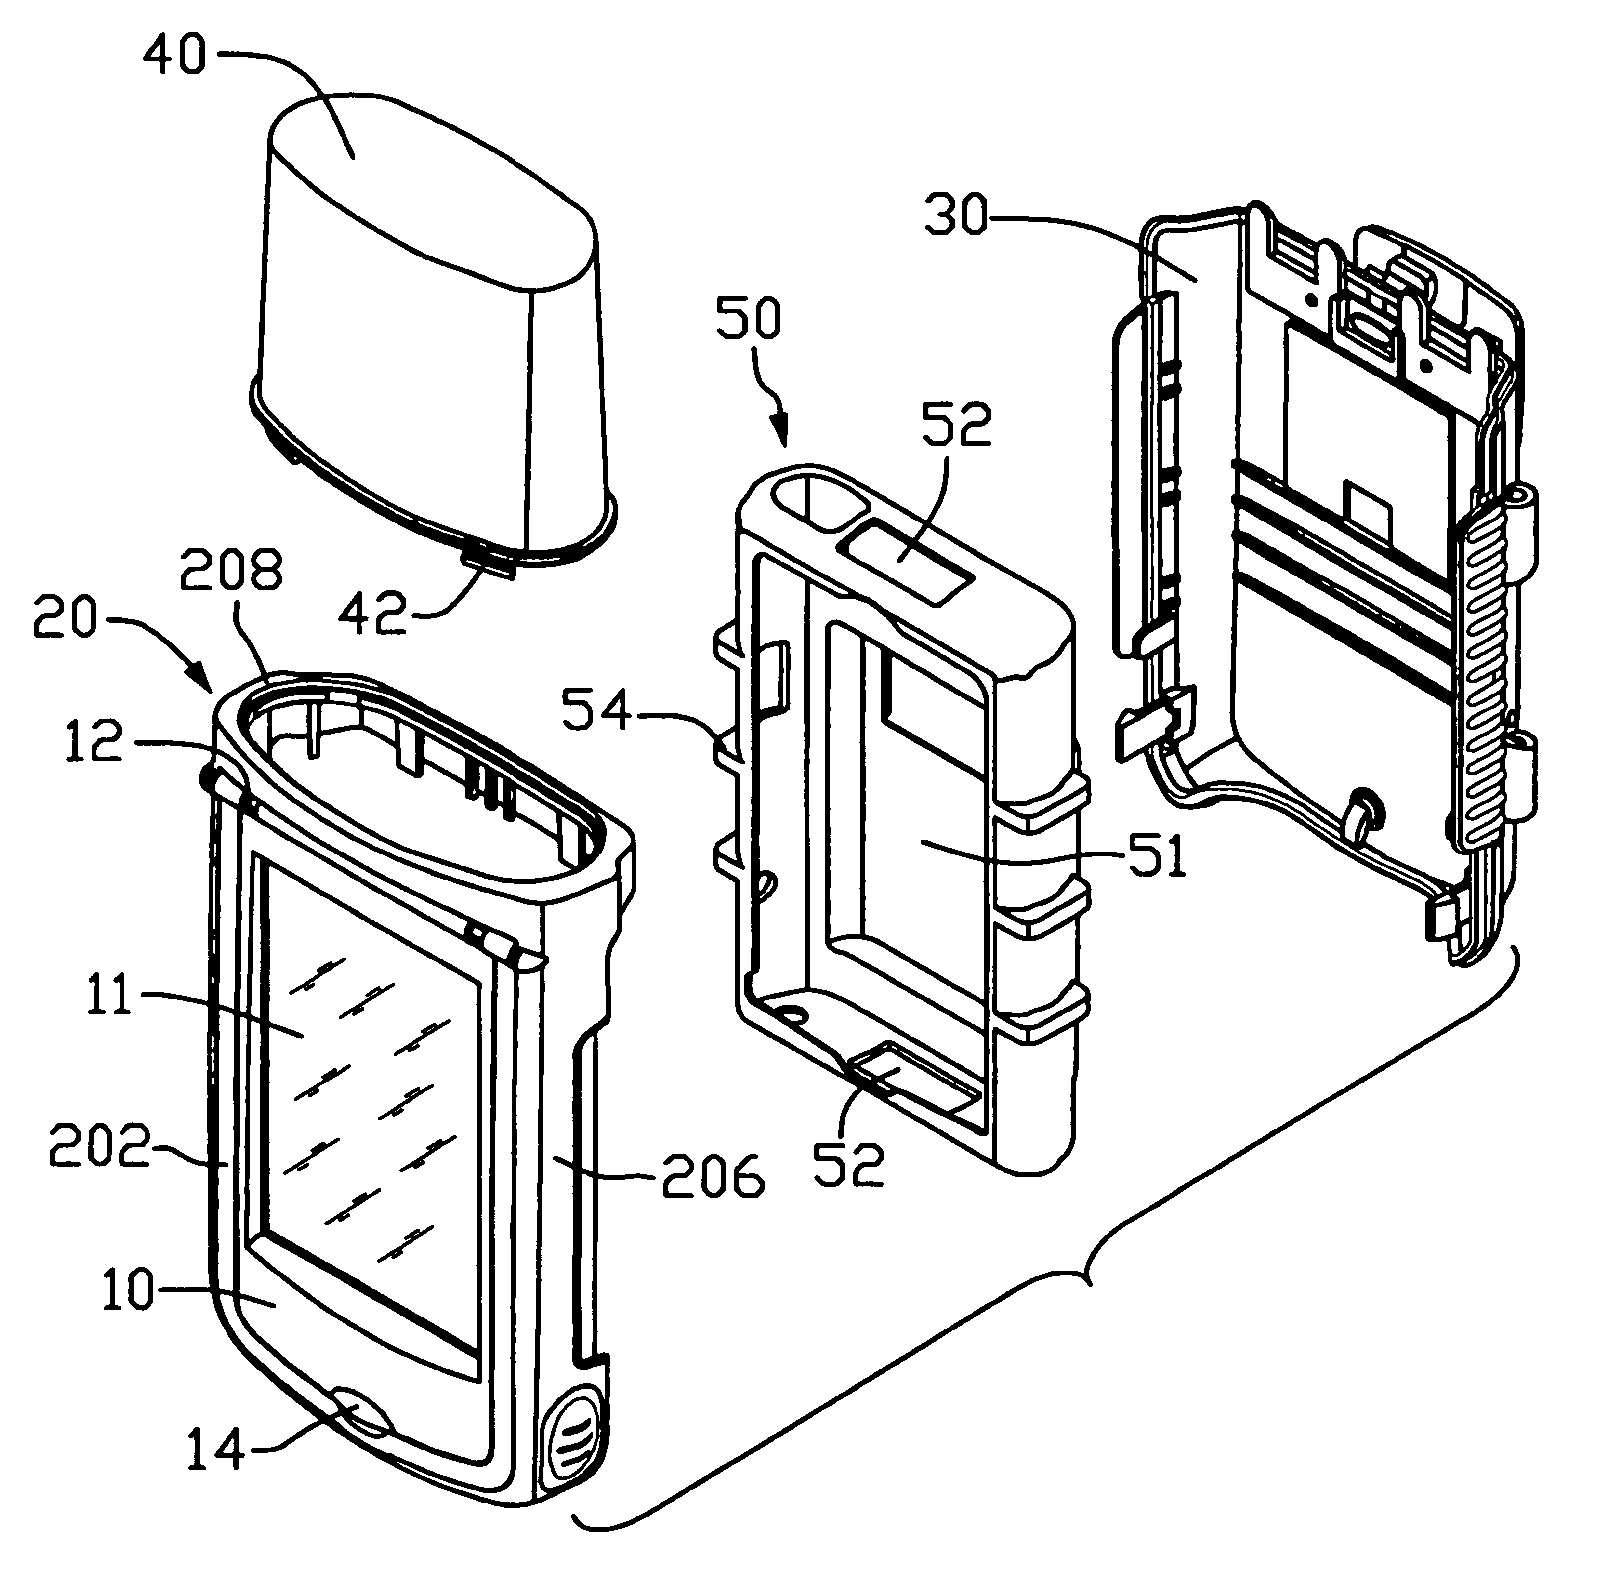 PDA carrying device